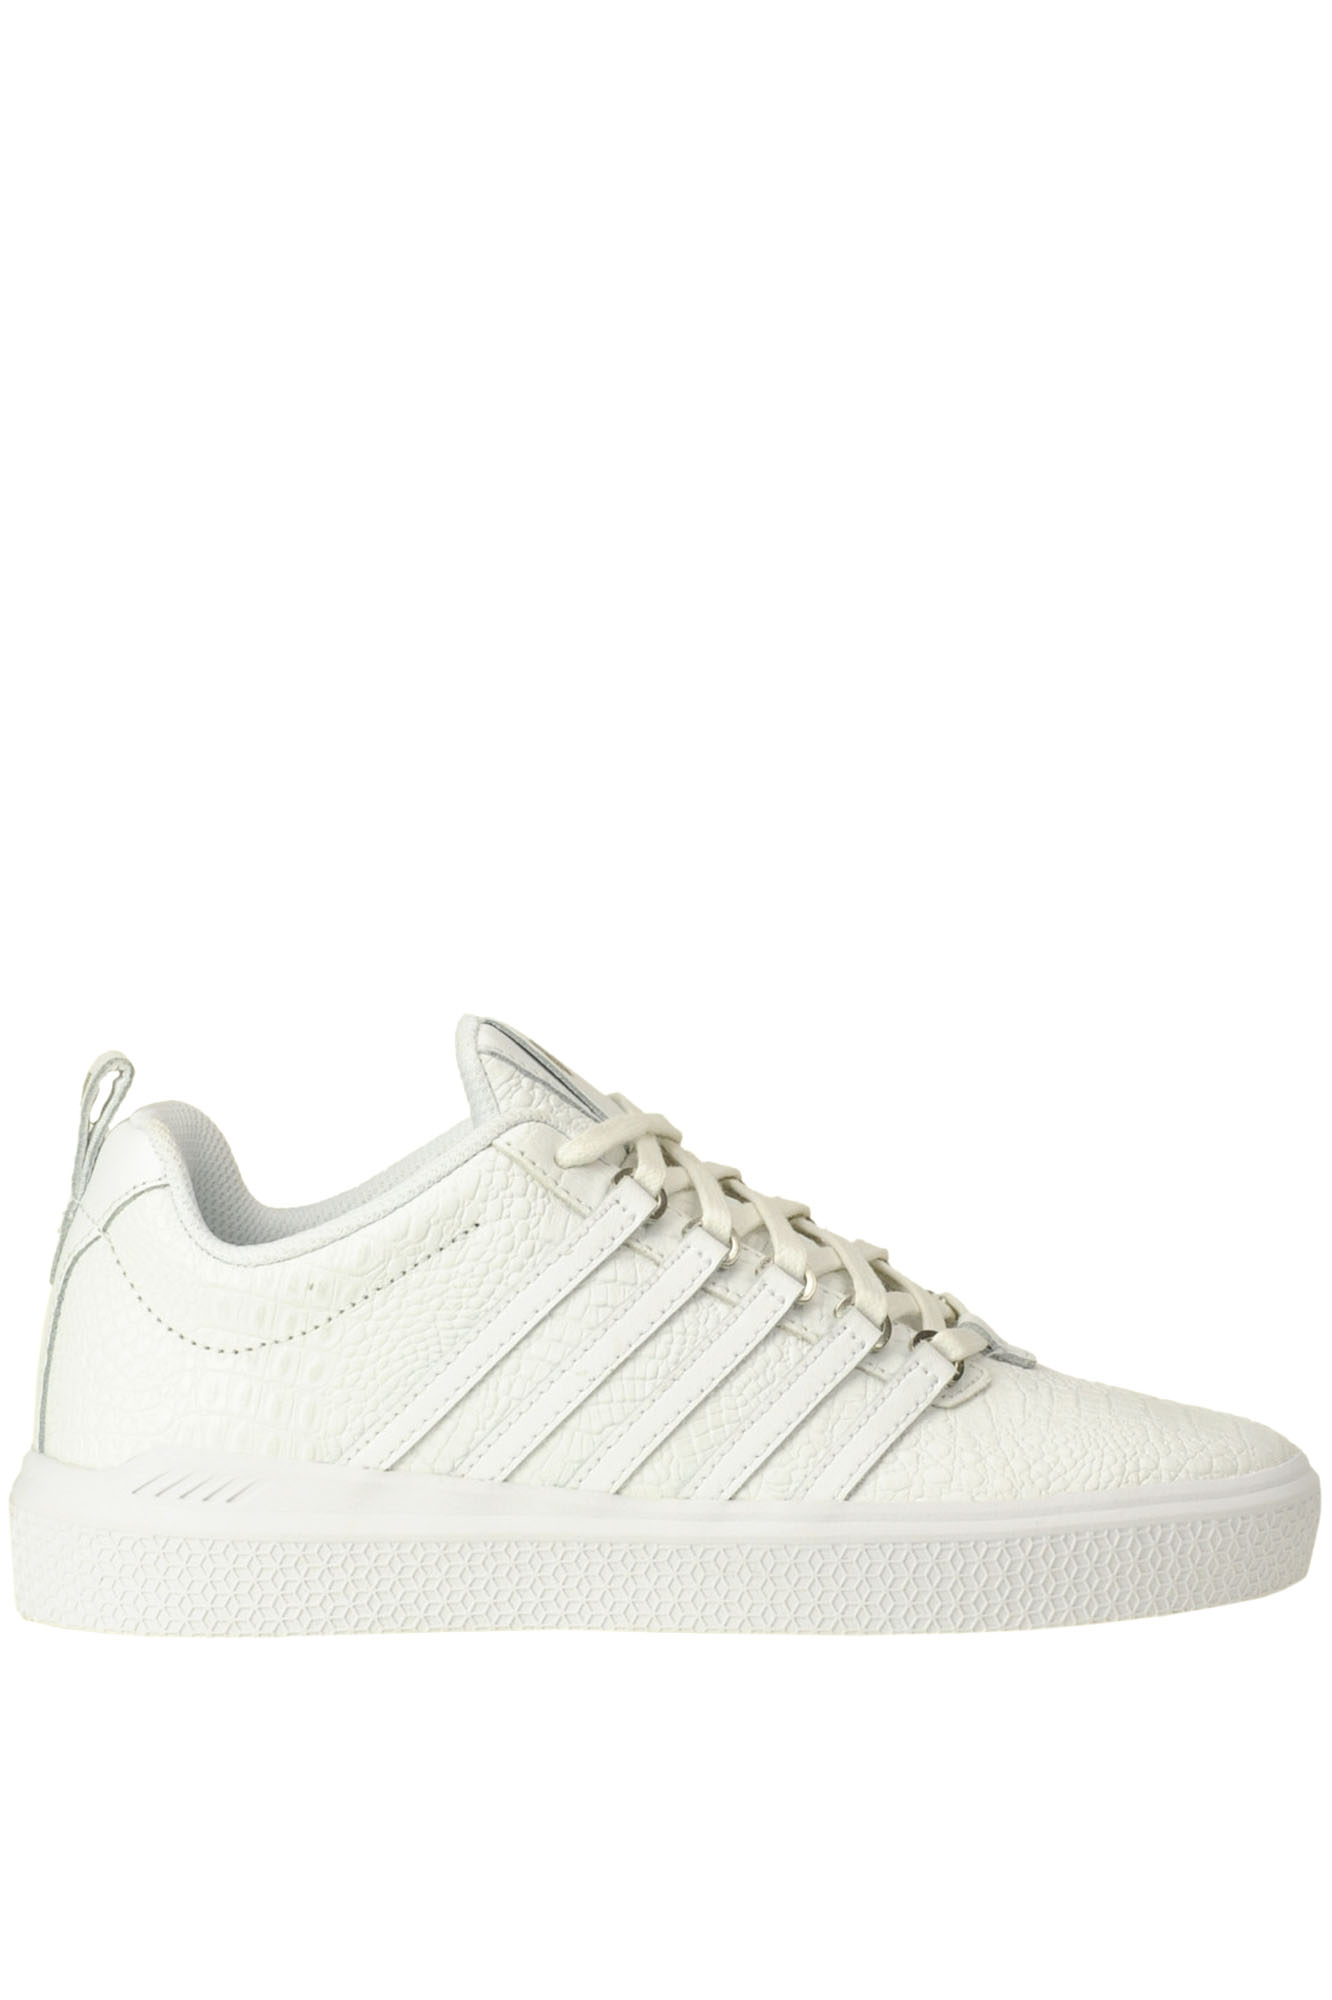 K.swiss Reptile Print Leather Sneakers In White